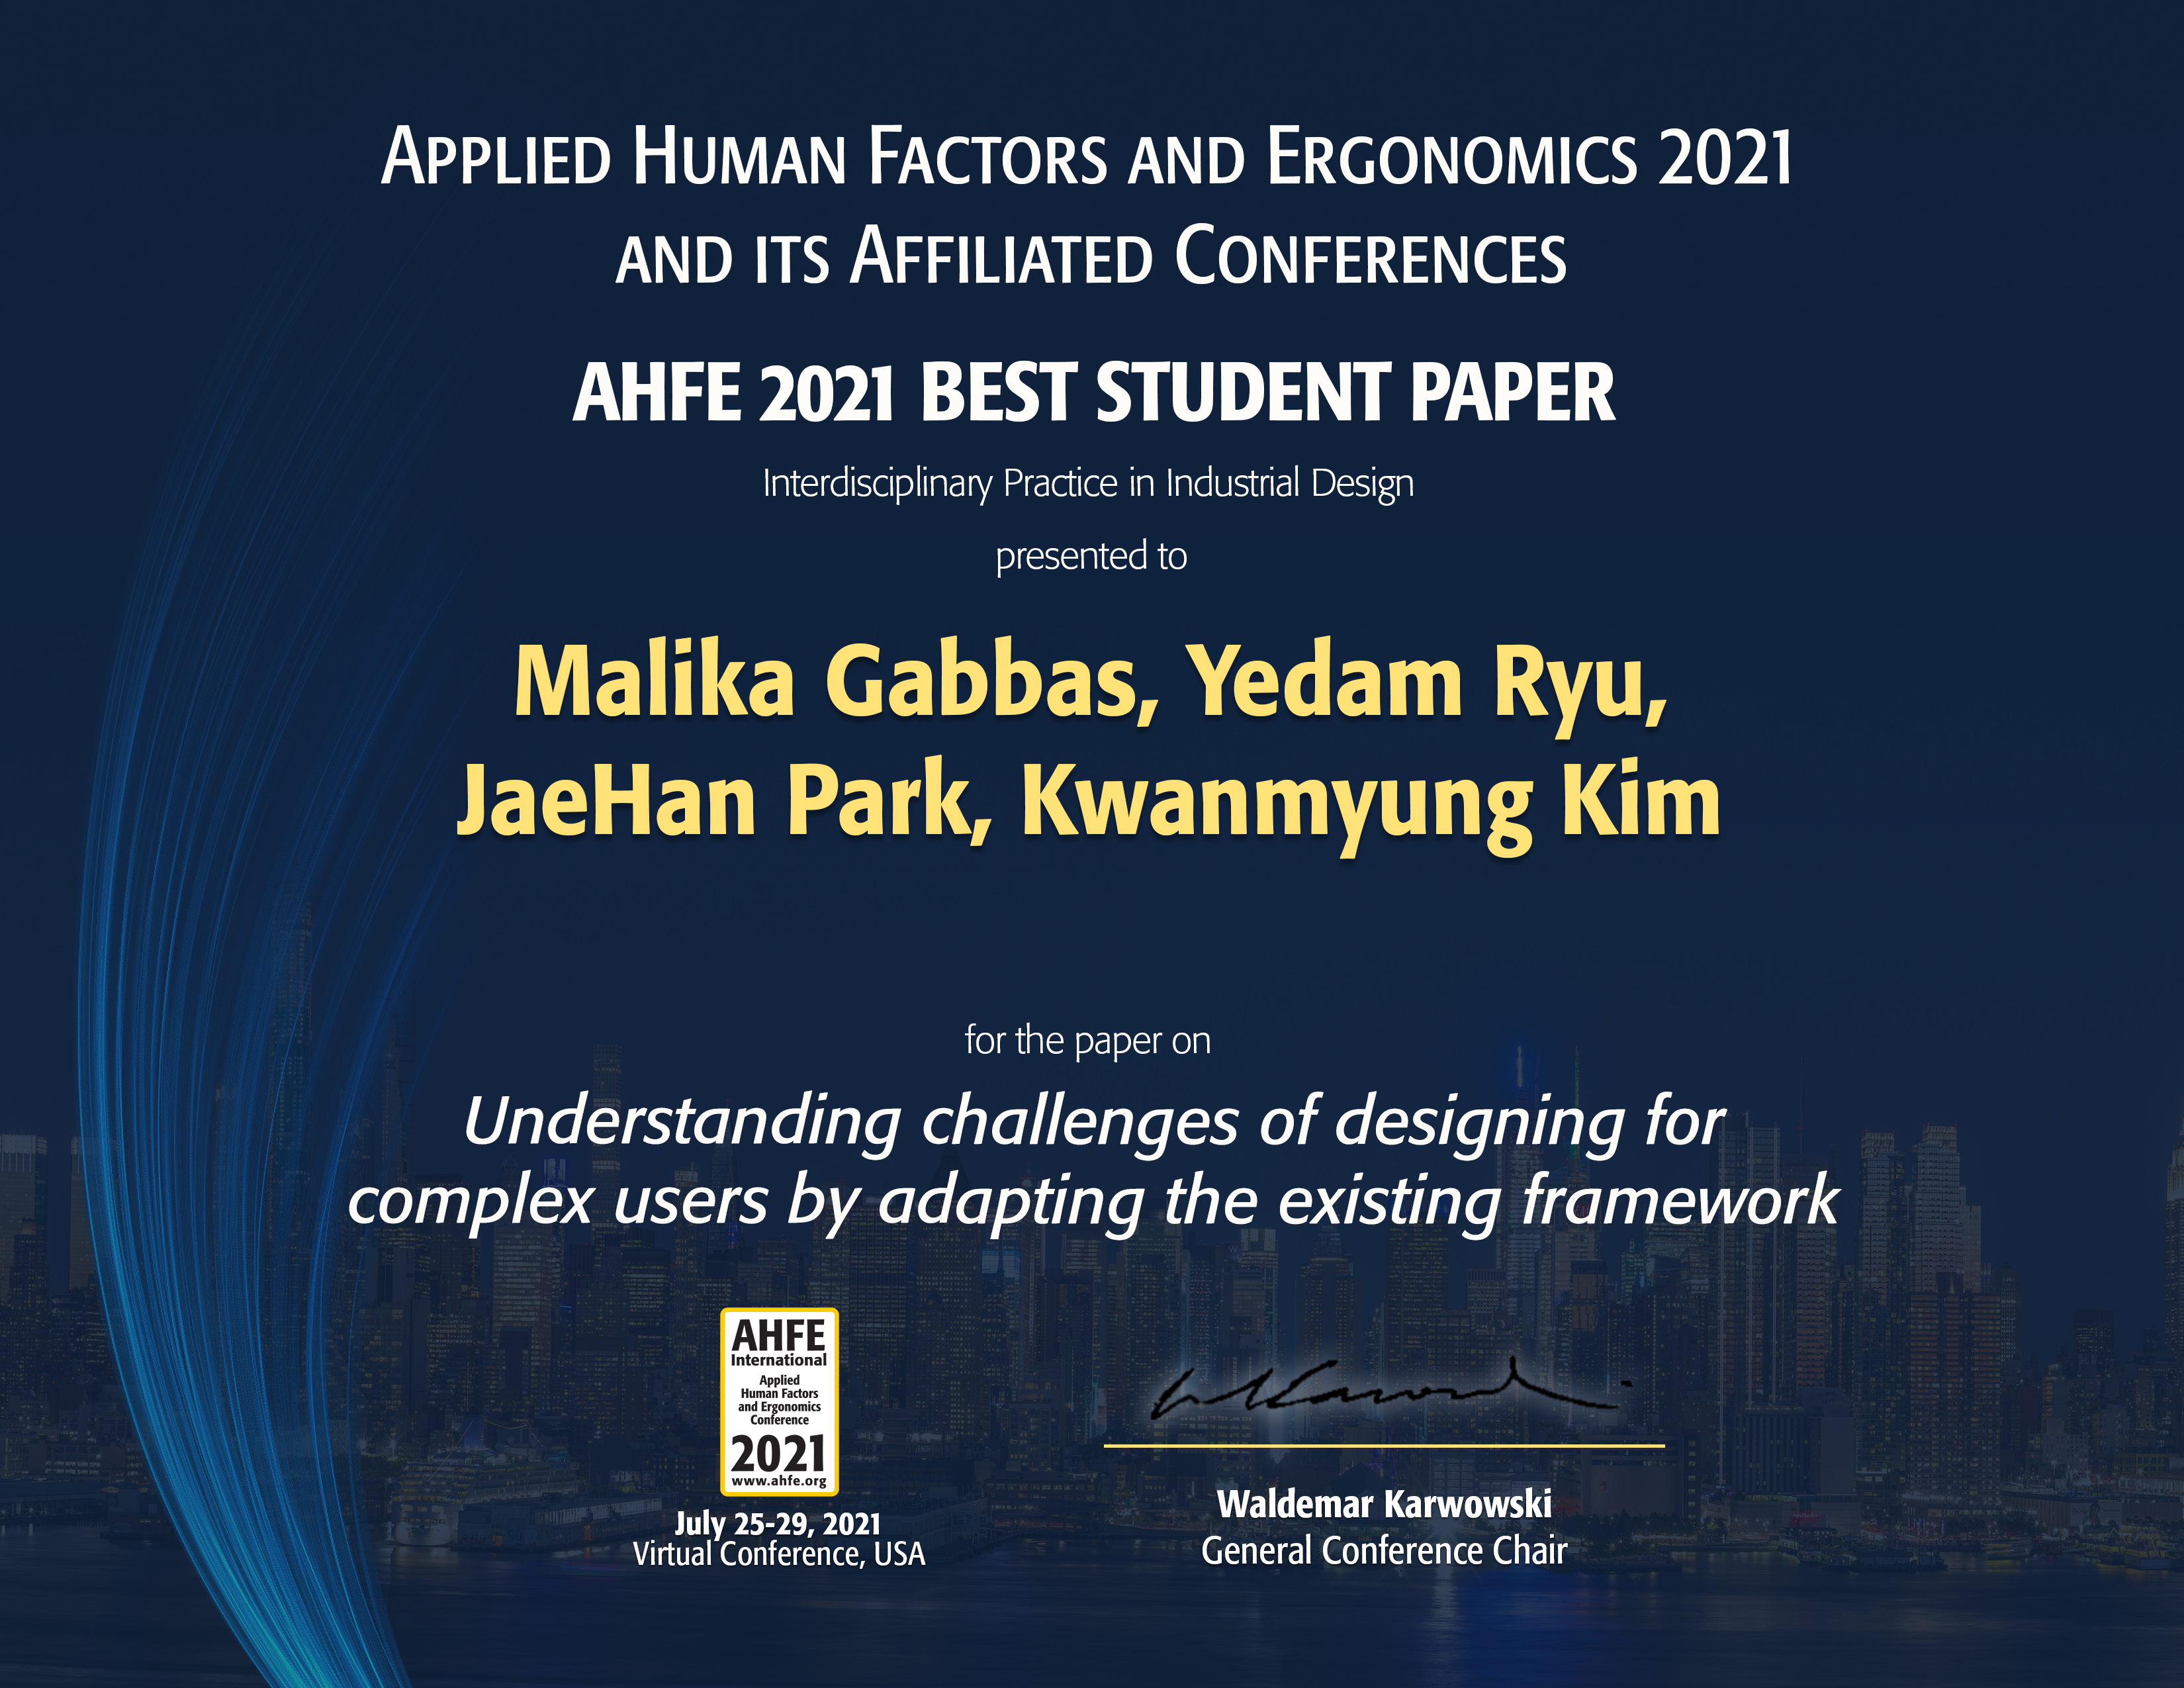 Professor KwanMyung Kim's design team highly commended for excellence at AHFE 2021 International Conference.